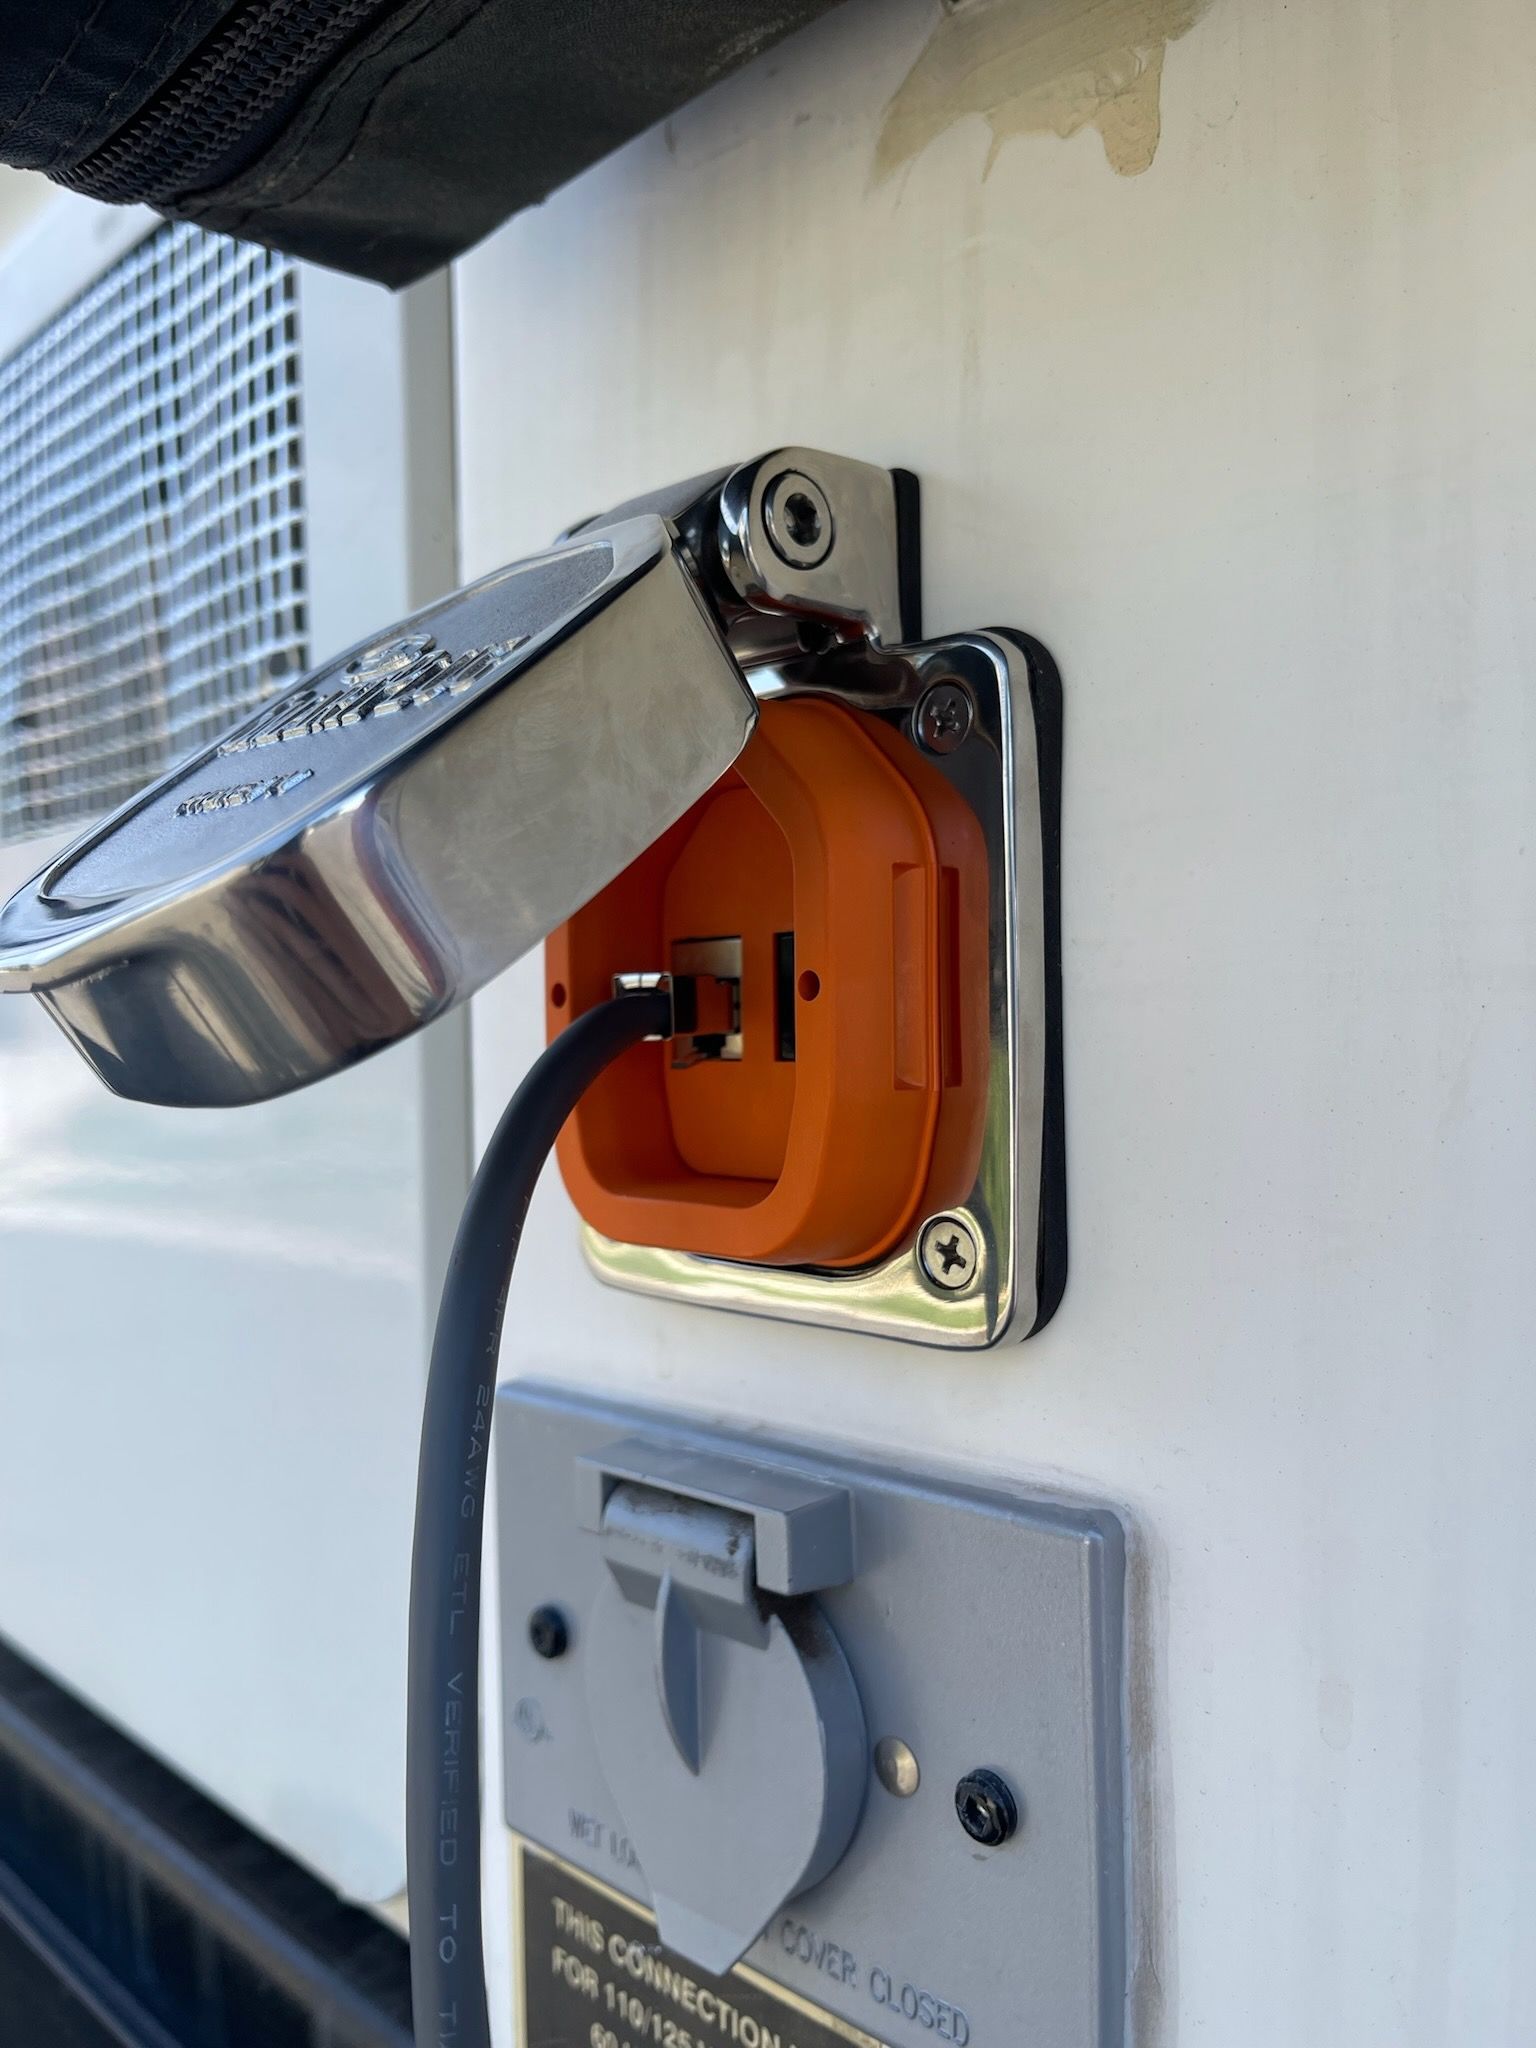 Lessons in Drilling Through Your Camper (aka installing a Starlink ethernet port)